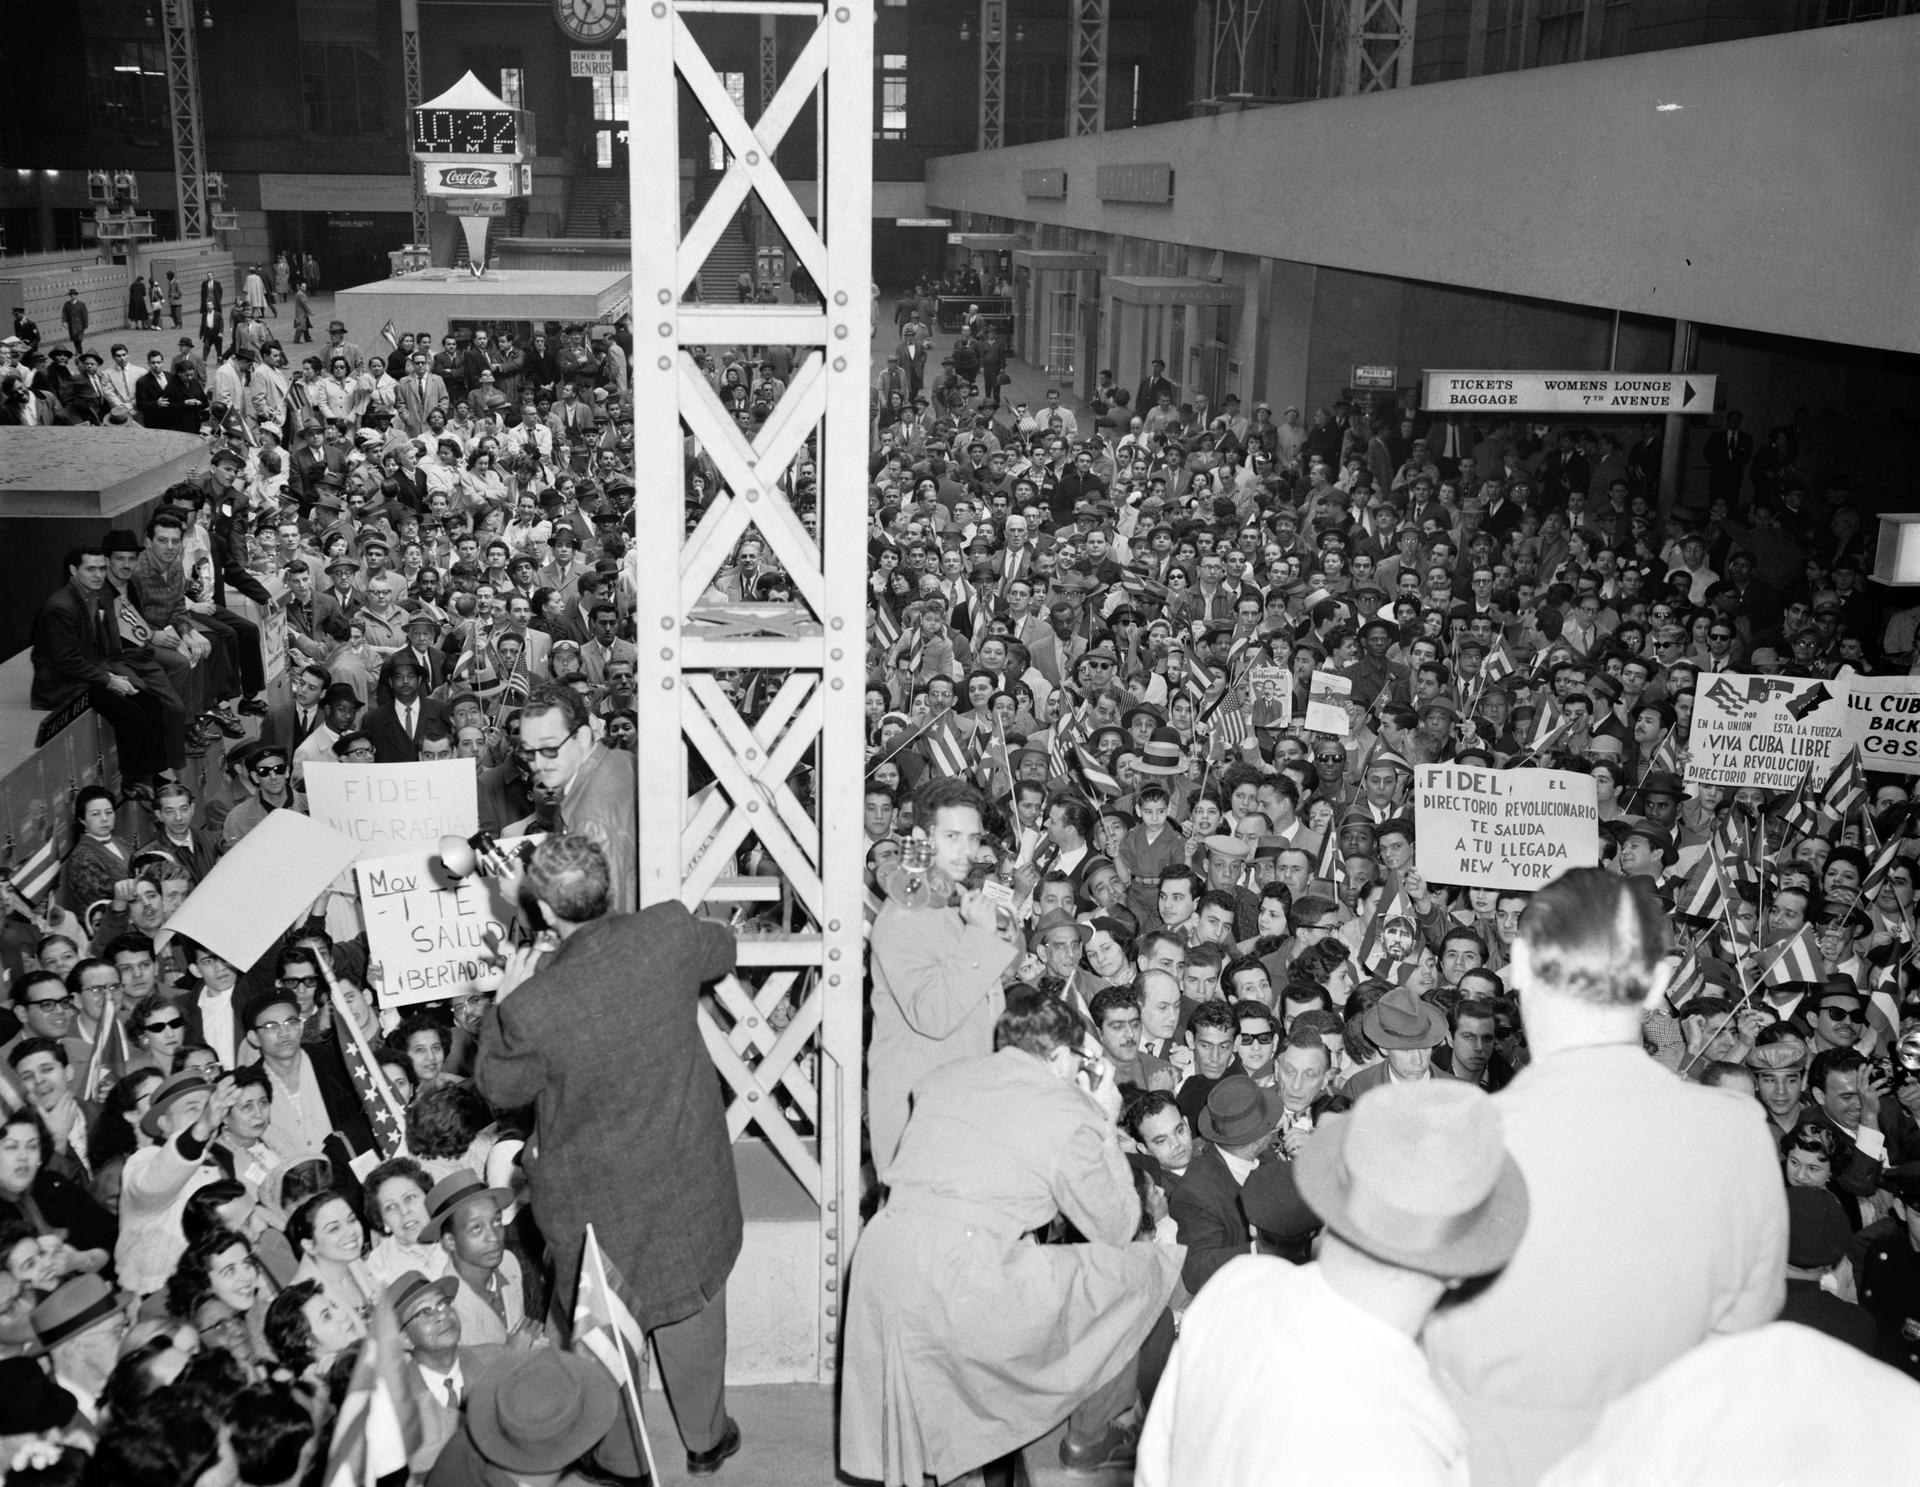 April 21, 1959 - New York City, NY - Jubilant crowds at Pennsylvania Station await the arrivial of Fidel Castro